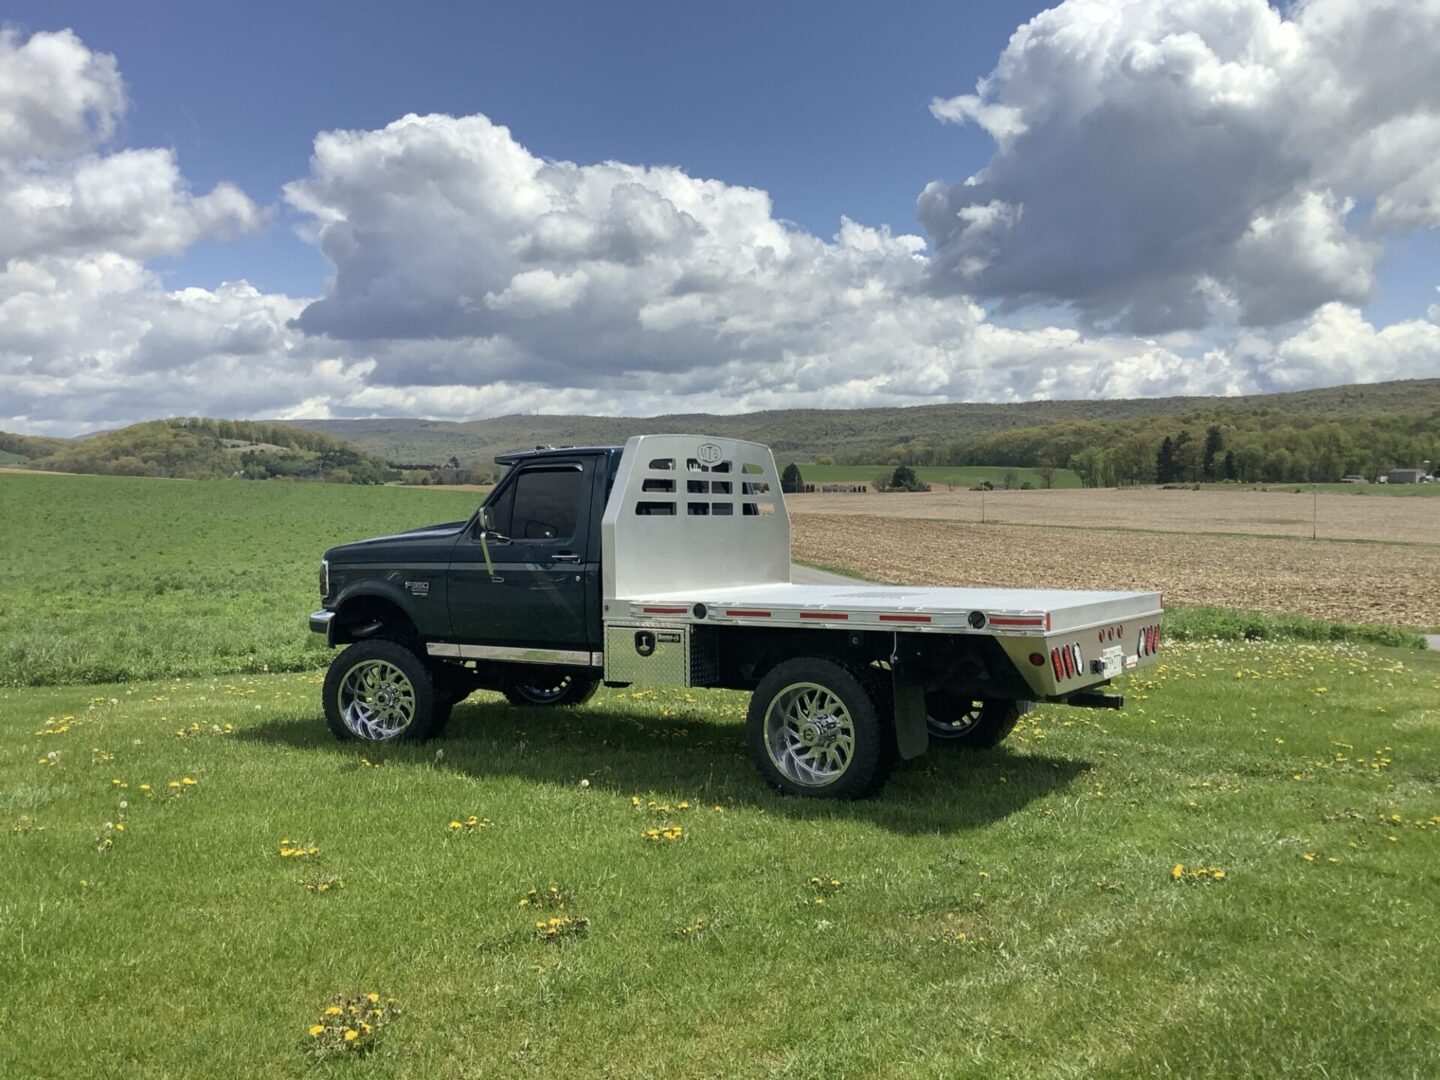 Pickup truck with a flatbed parked in a green field under a partly cloudy sky.